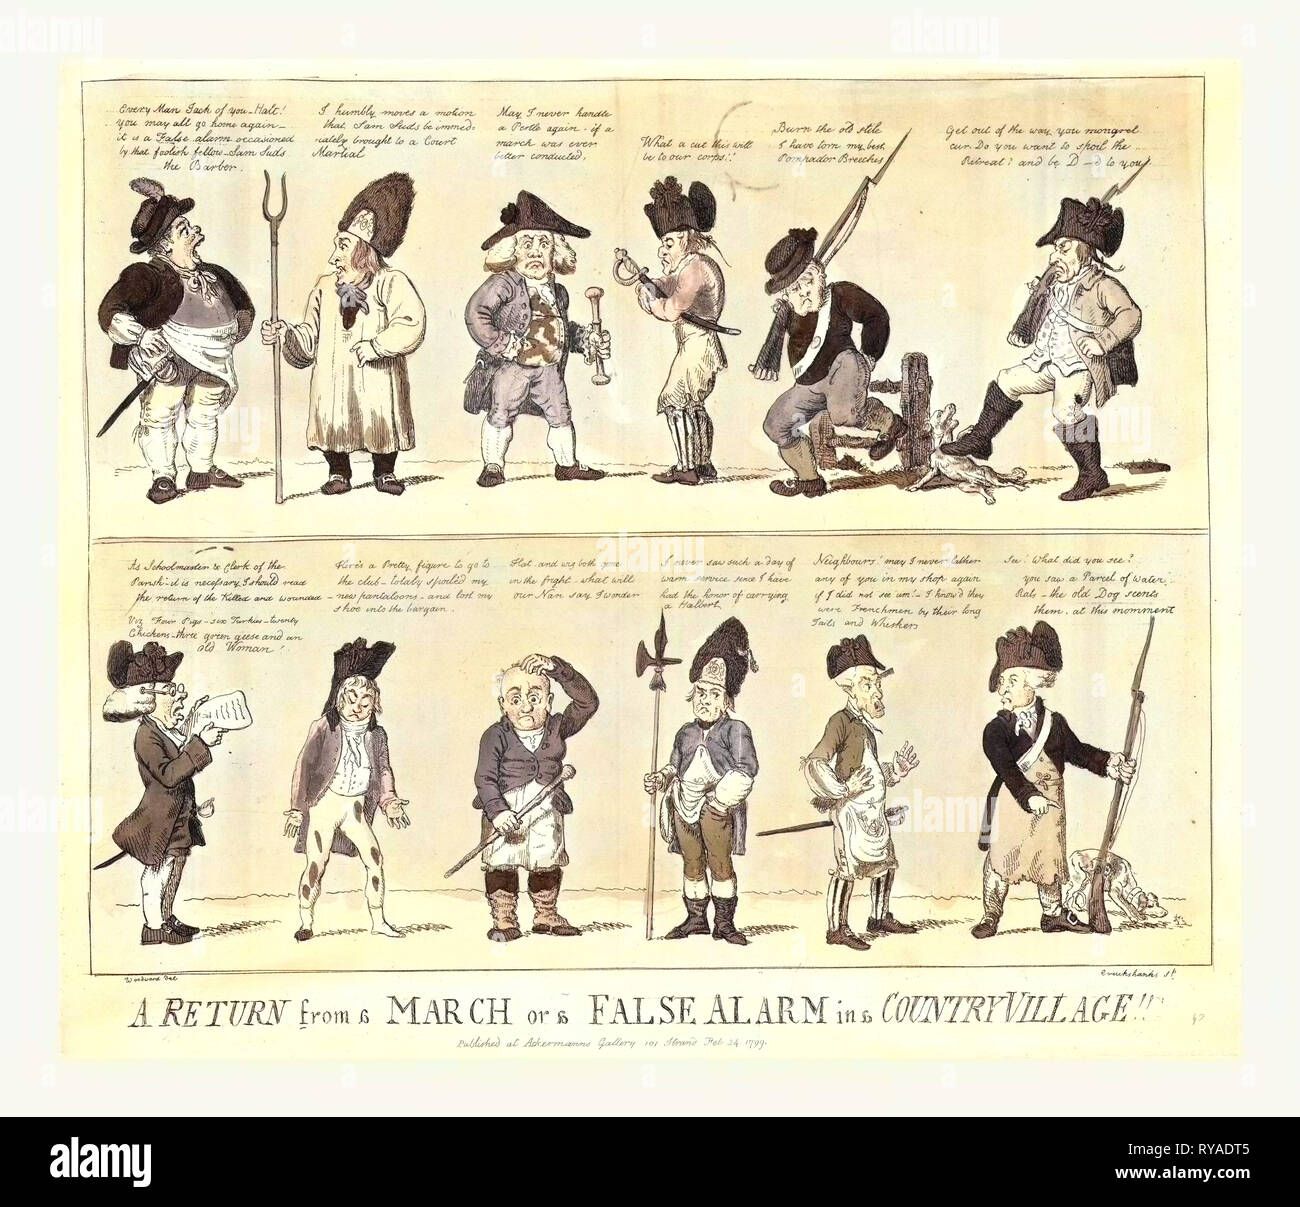 A Return from a March or a False Alarm in a Country Village, Engraving 1799, a Group of British Citizens Mustered in Response to an Alarm that the French Were Attacking England which Proved to Be False, They Complain of Soiled, Torn, or Lost Clothing, and One Reads a List of the Killed and Wounded which Includes Several Pigs, Fowl, and an Old Woman Stock Photo